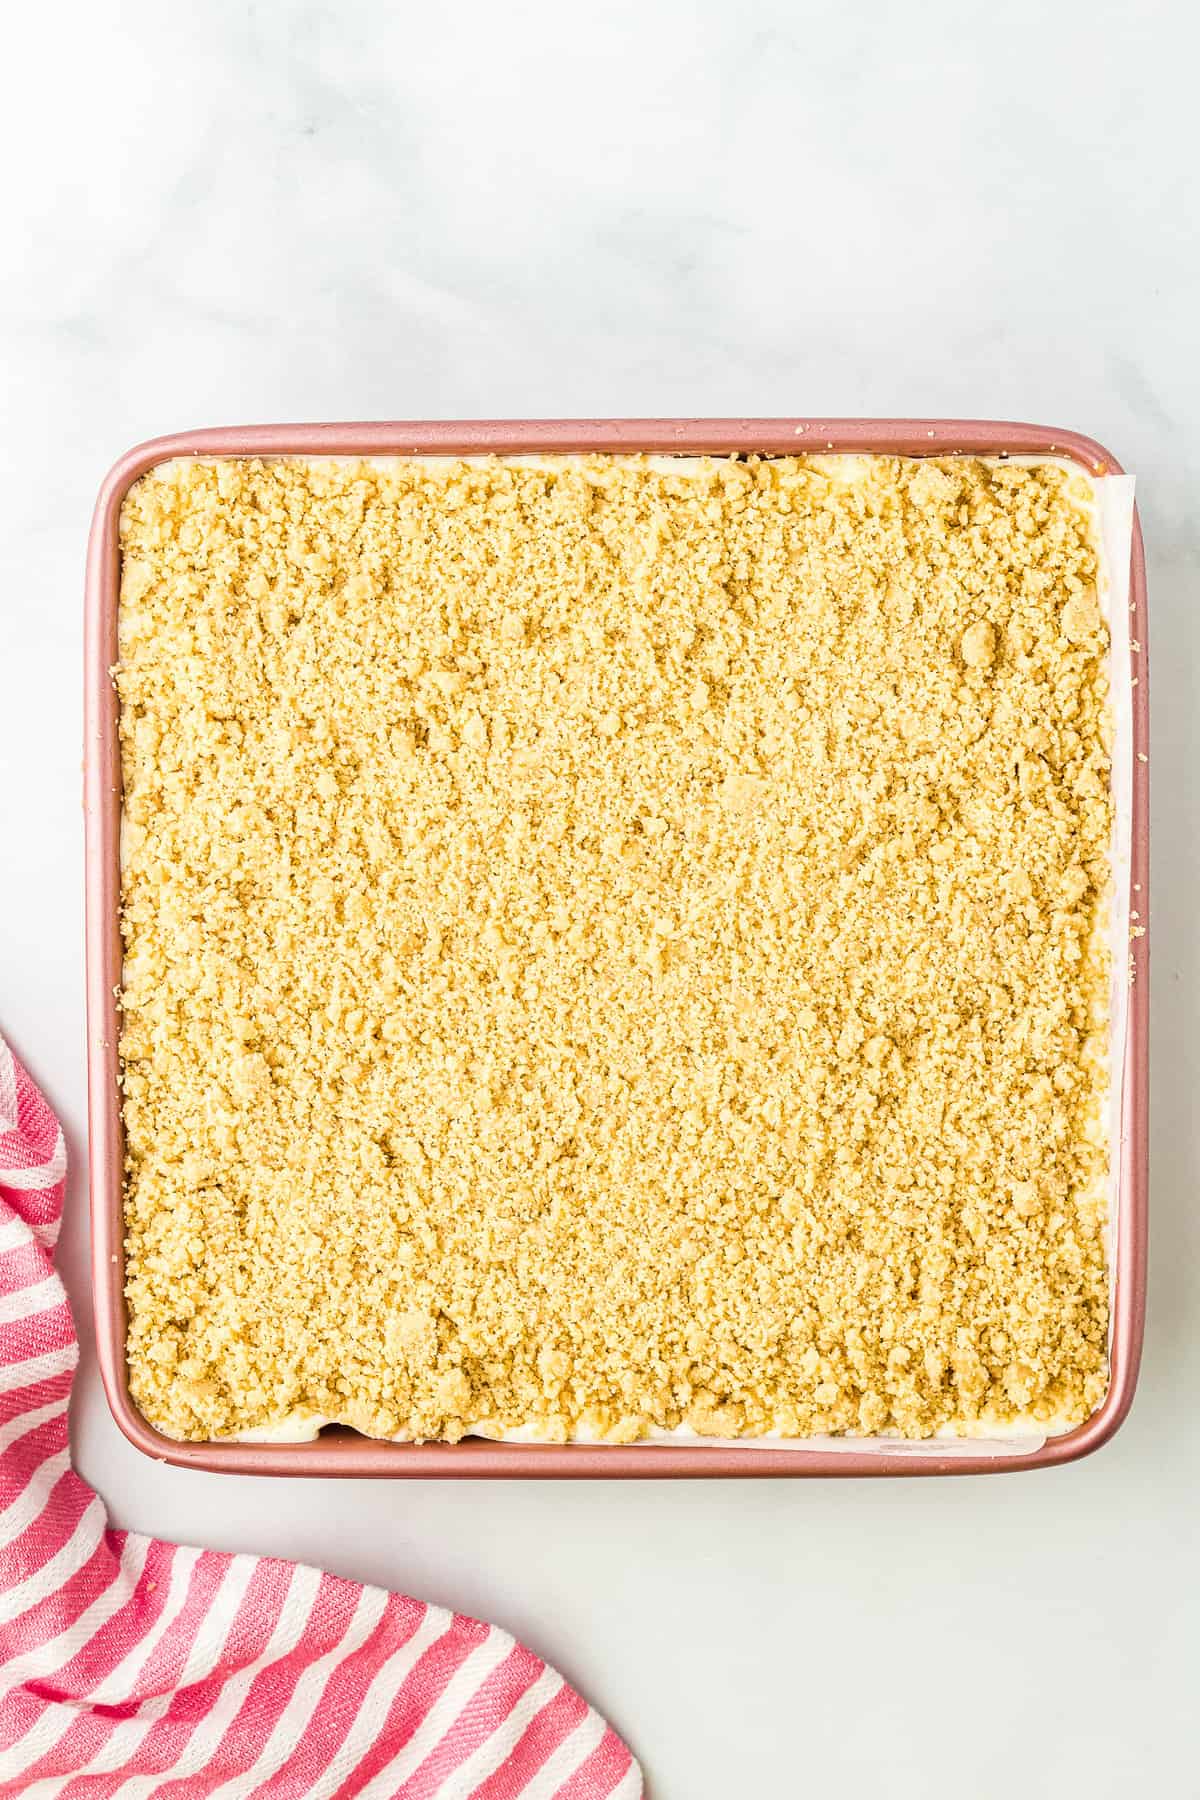 Crumble in mixing bowl on top of cheesecake bars in pan